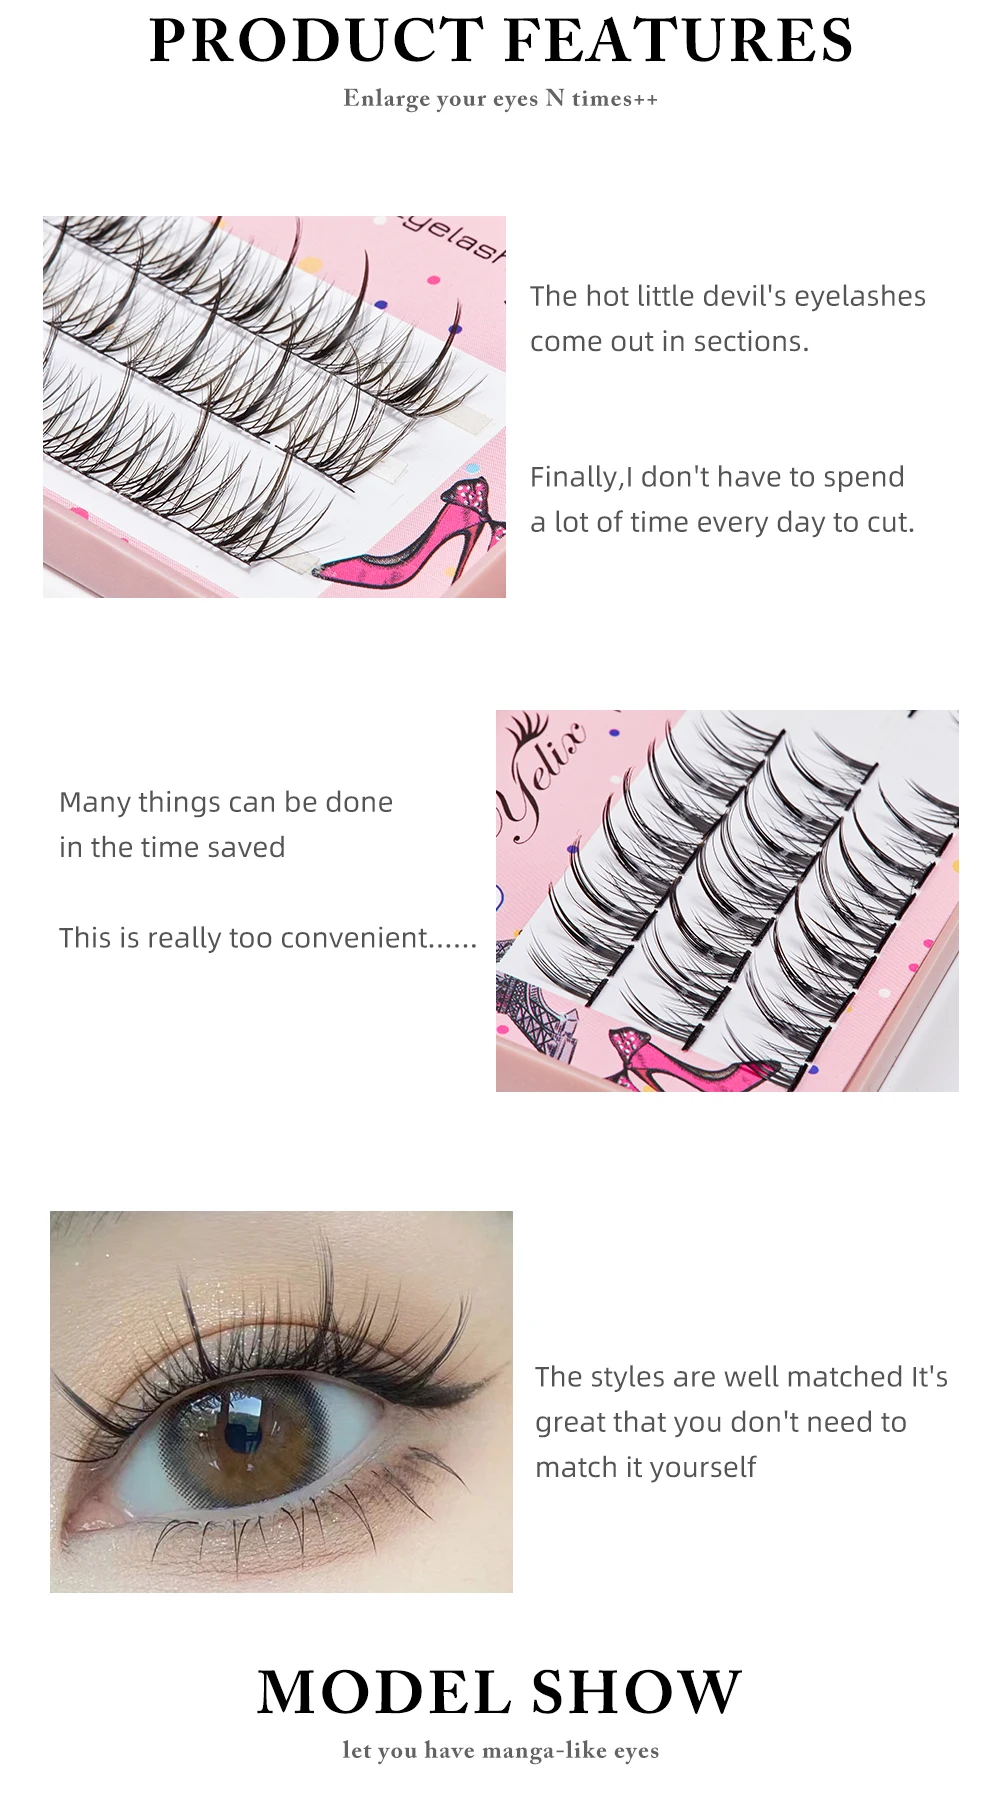 Yelix Upgrade A-type Eyelashes Manga Lashes Natural Individual Cluster Quick Diy Eyelash Extensions Kit Cosplay -Outlet Maid Outfit Store S1c454fa66e3046d2b7f749845c3f44b93.jpg